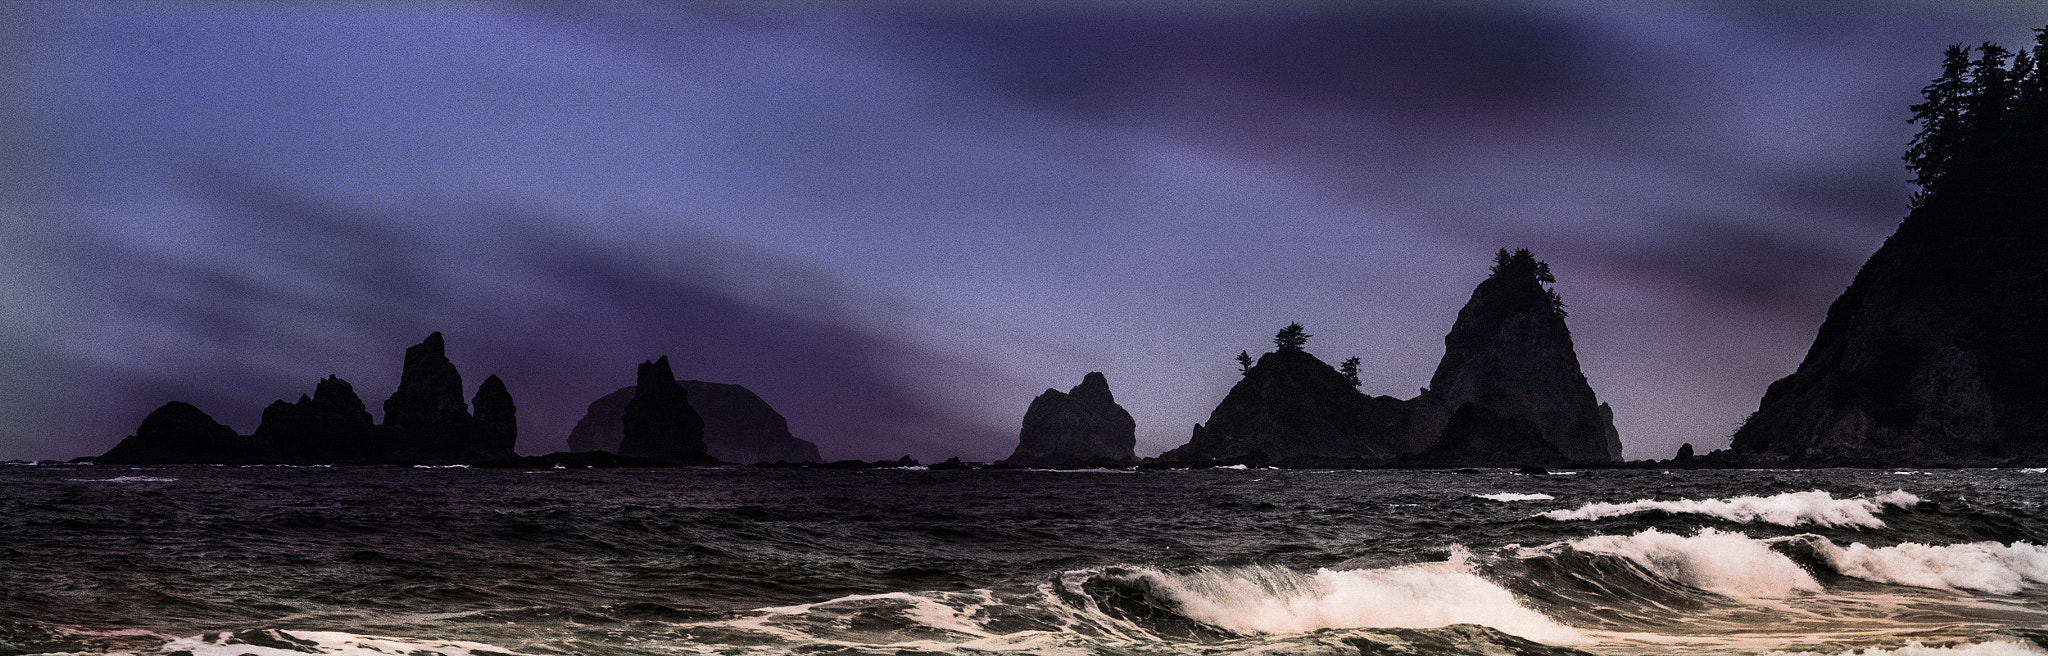 Nikon D800 sample photo. Storm at the sea stacks in the olympic peninsula photography